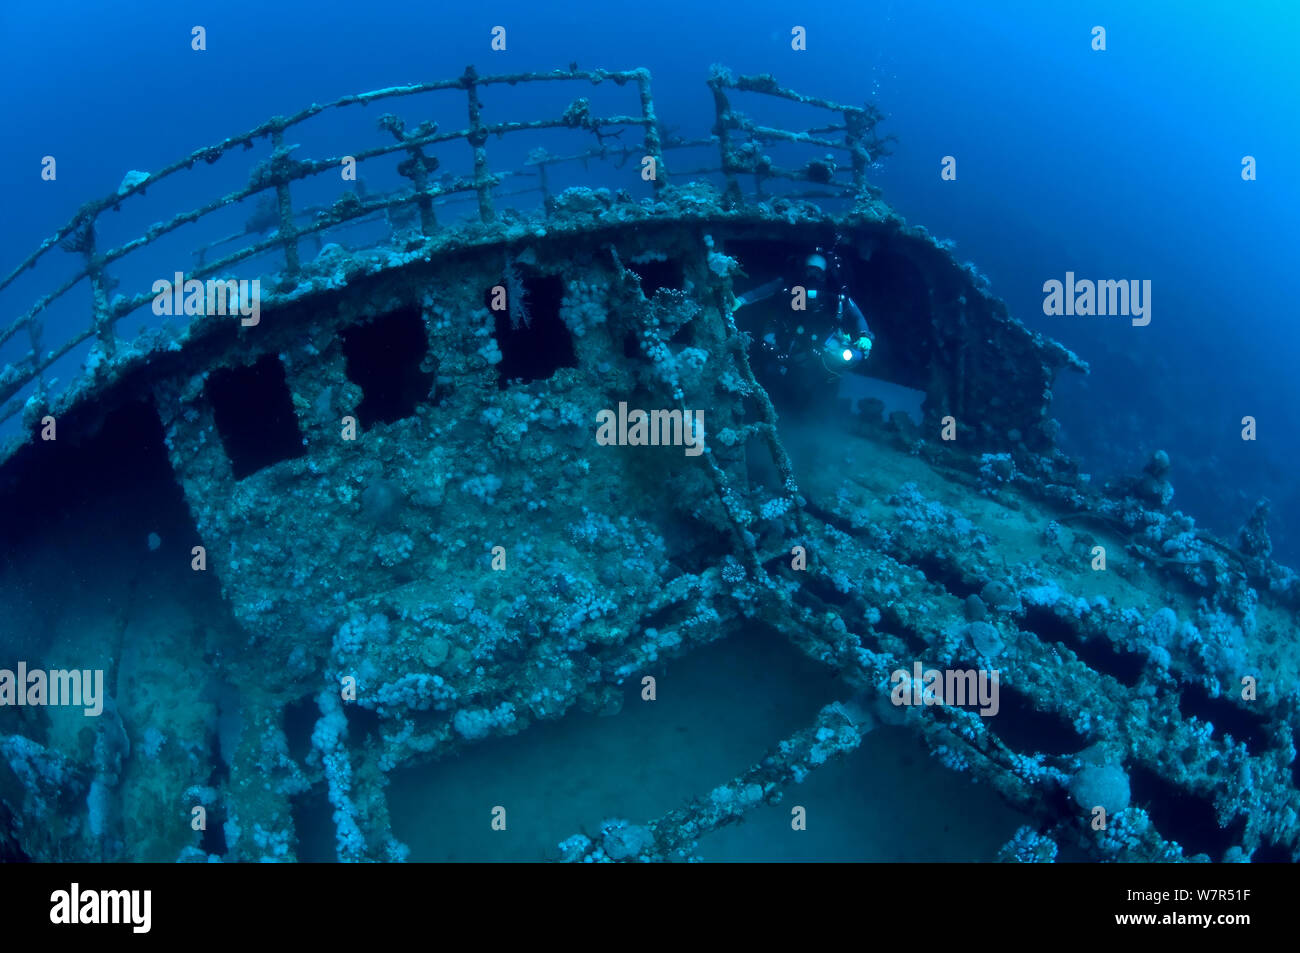 Wreck of the 'Iouna'. Diver at the ships stern - probably the bosuns store. Wrecked between 1912-1918. Sharmo reef, Yanbu, Saudi Arabia, July 2010 Stock Photo